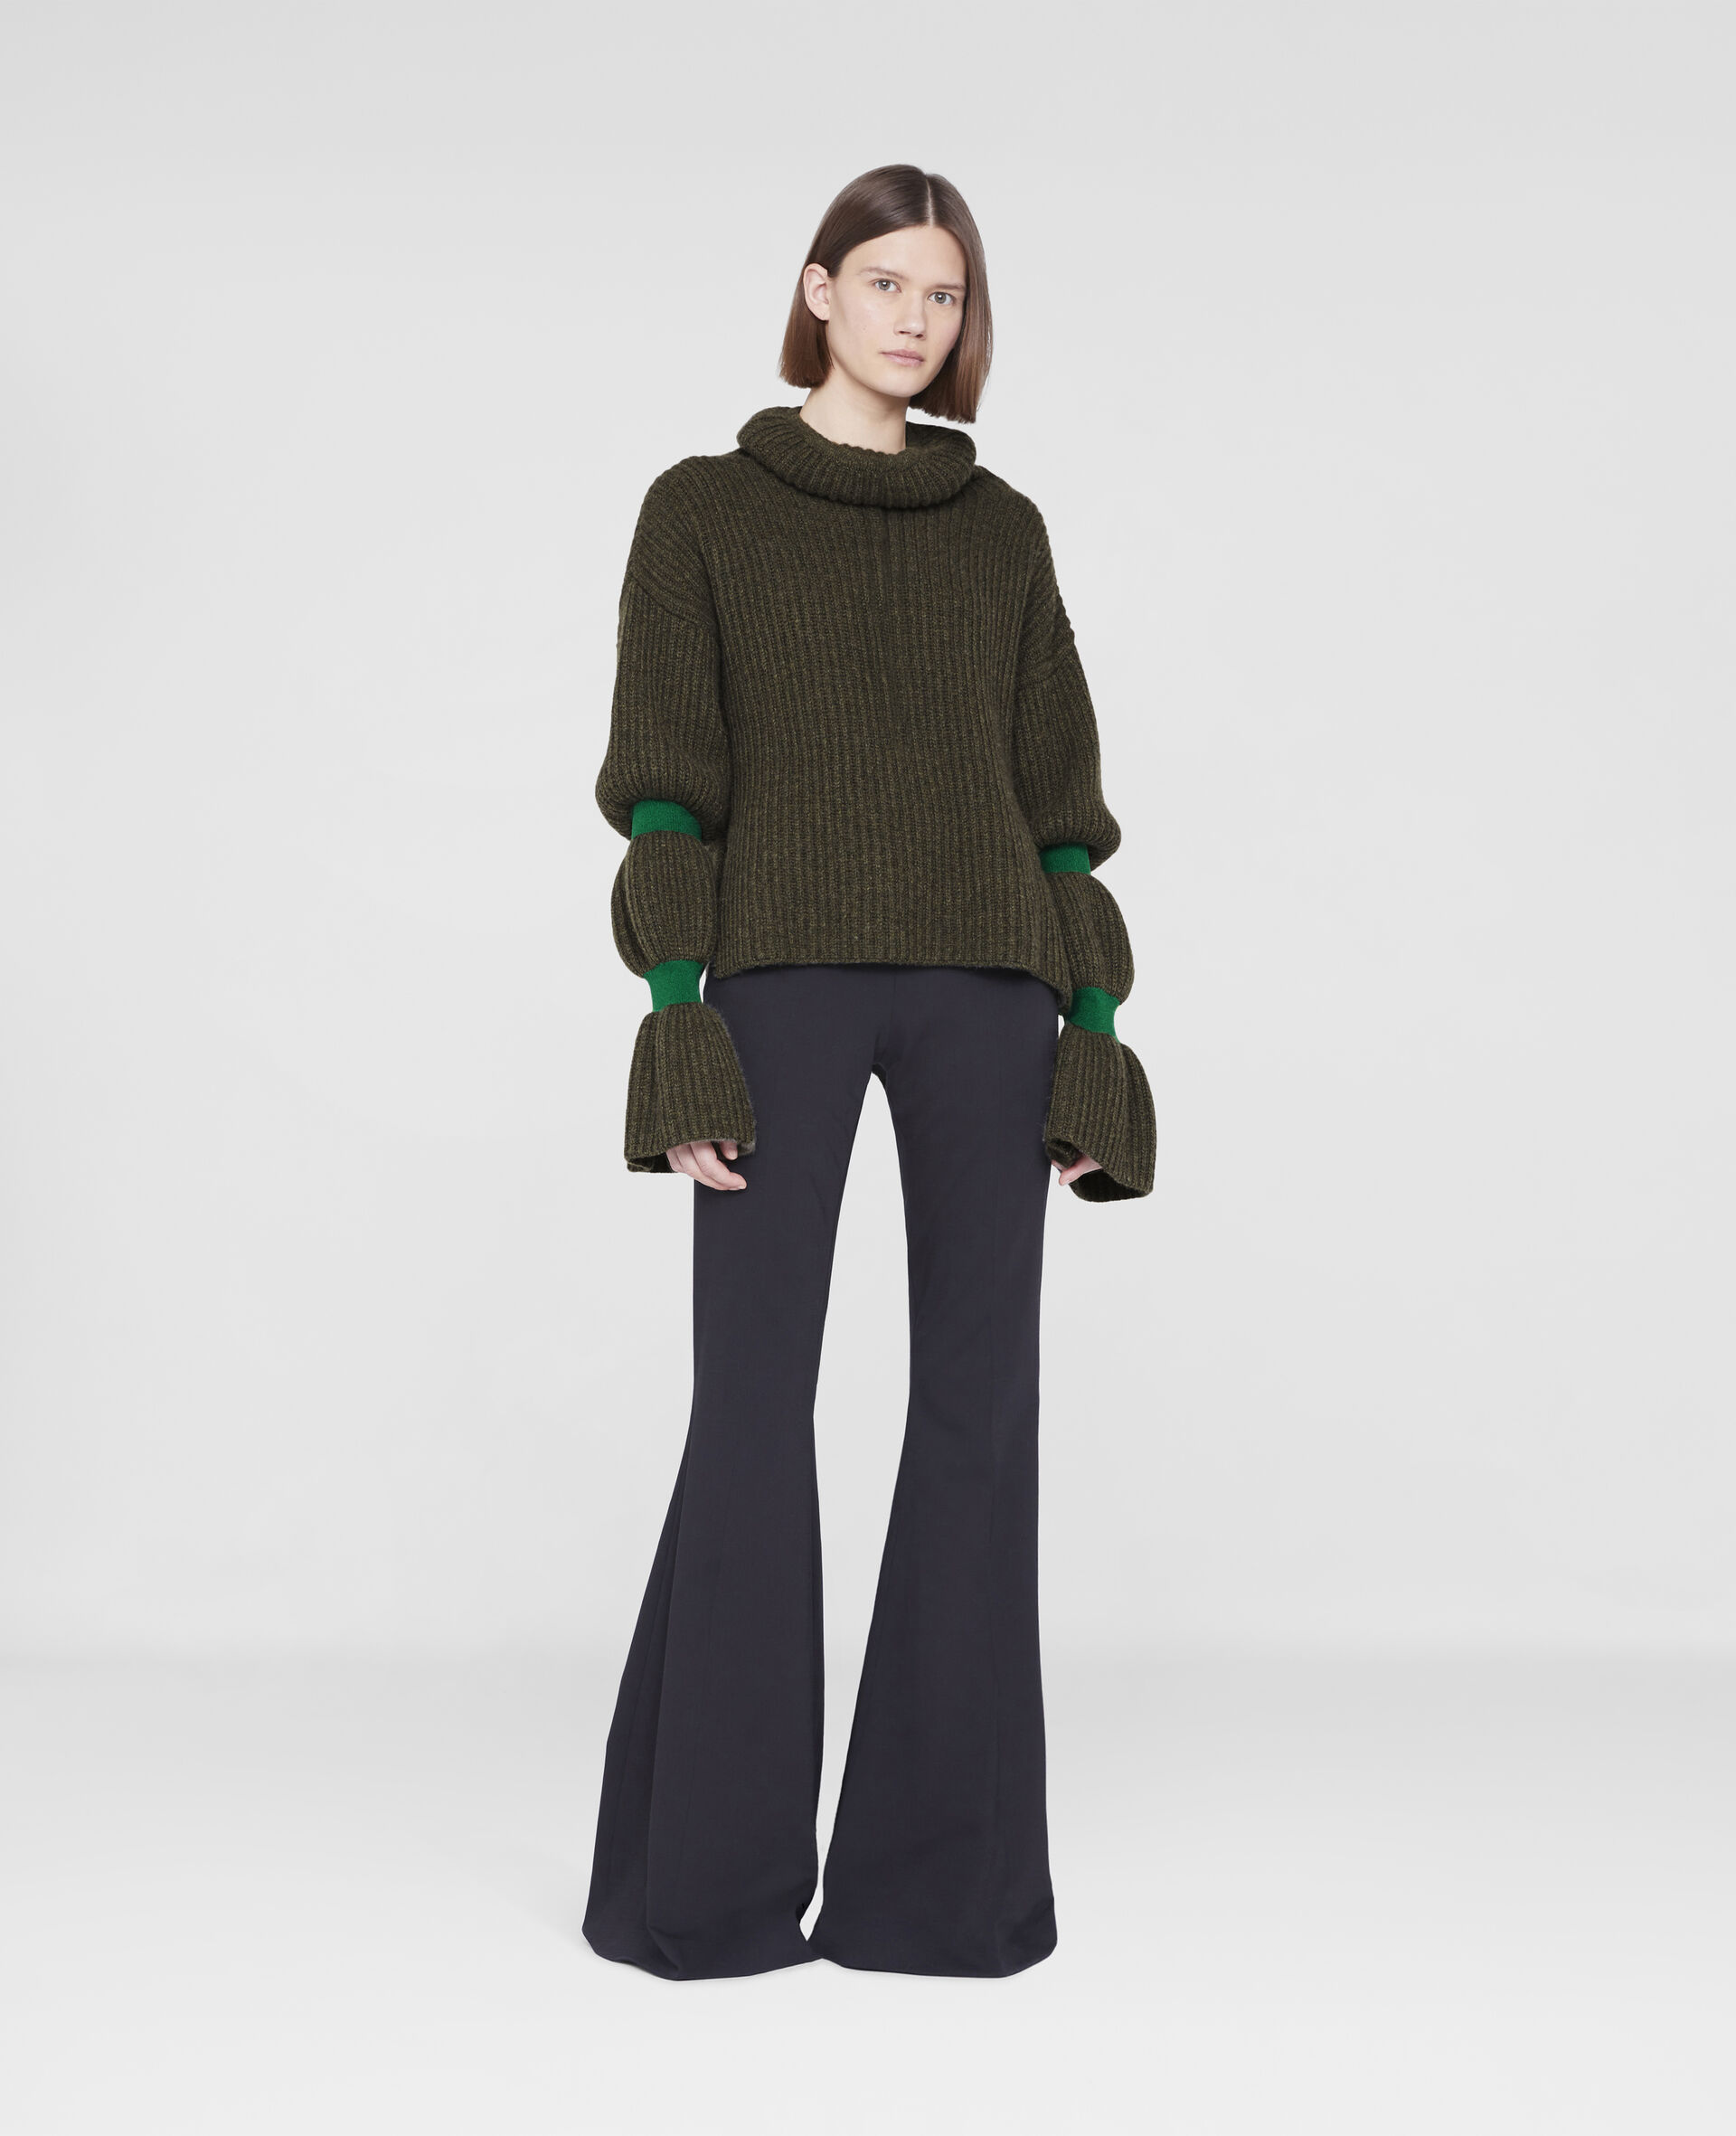 Soft Volume Sweater-Green-large image number 1